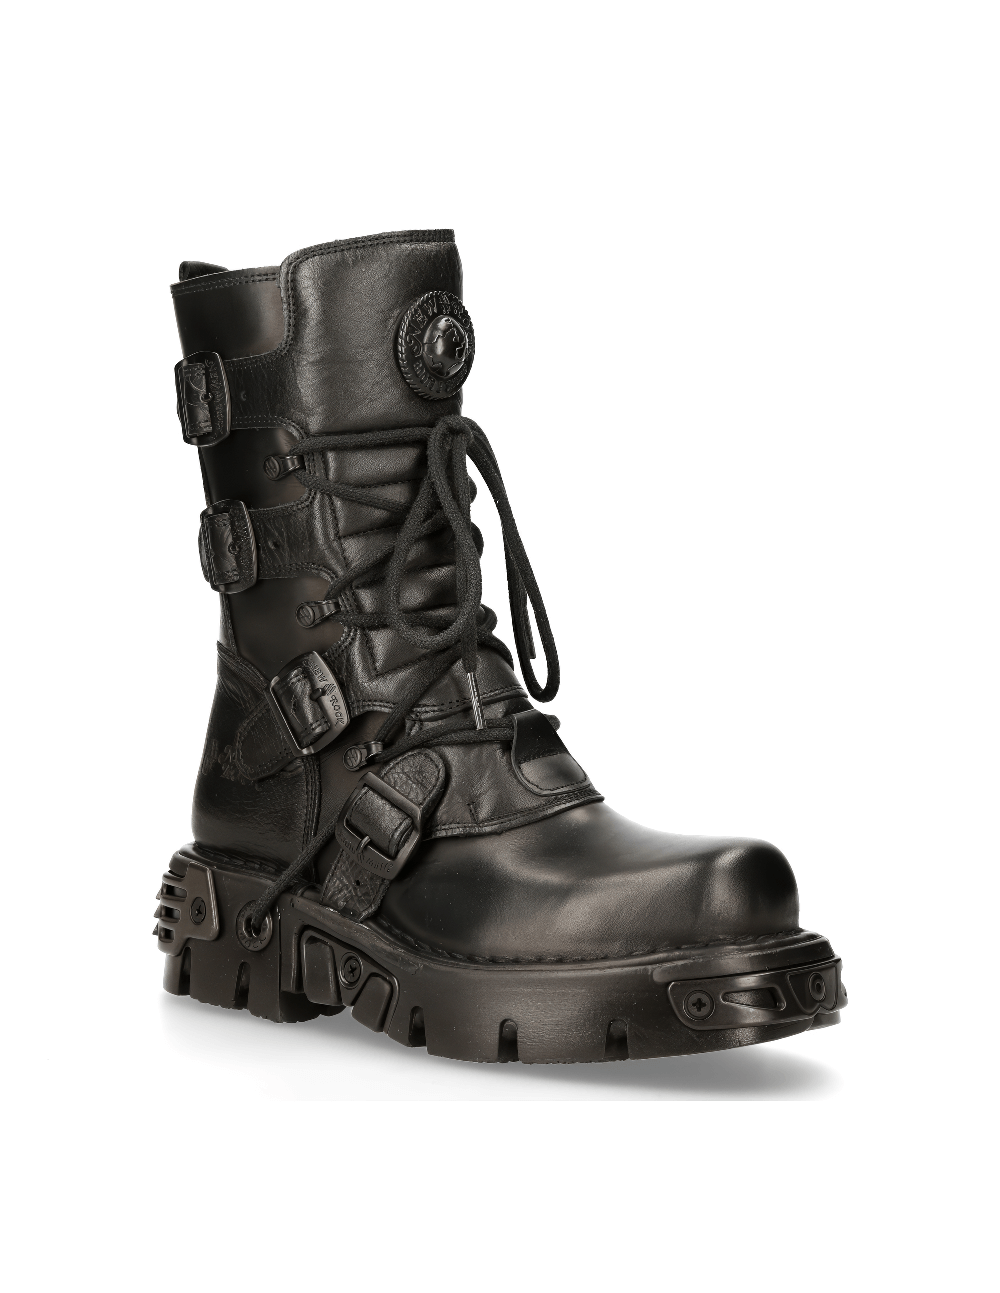 NEW ROCK Gothic Black Leather Boots with Metallic Details